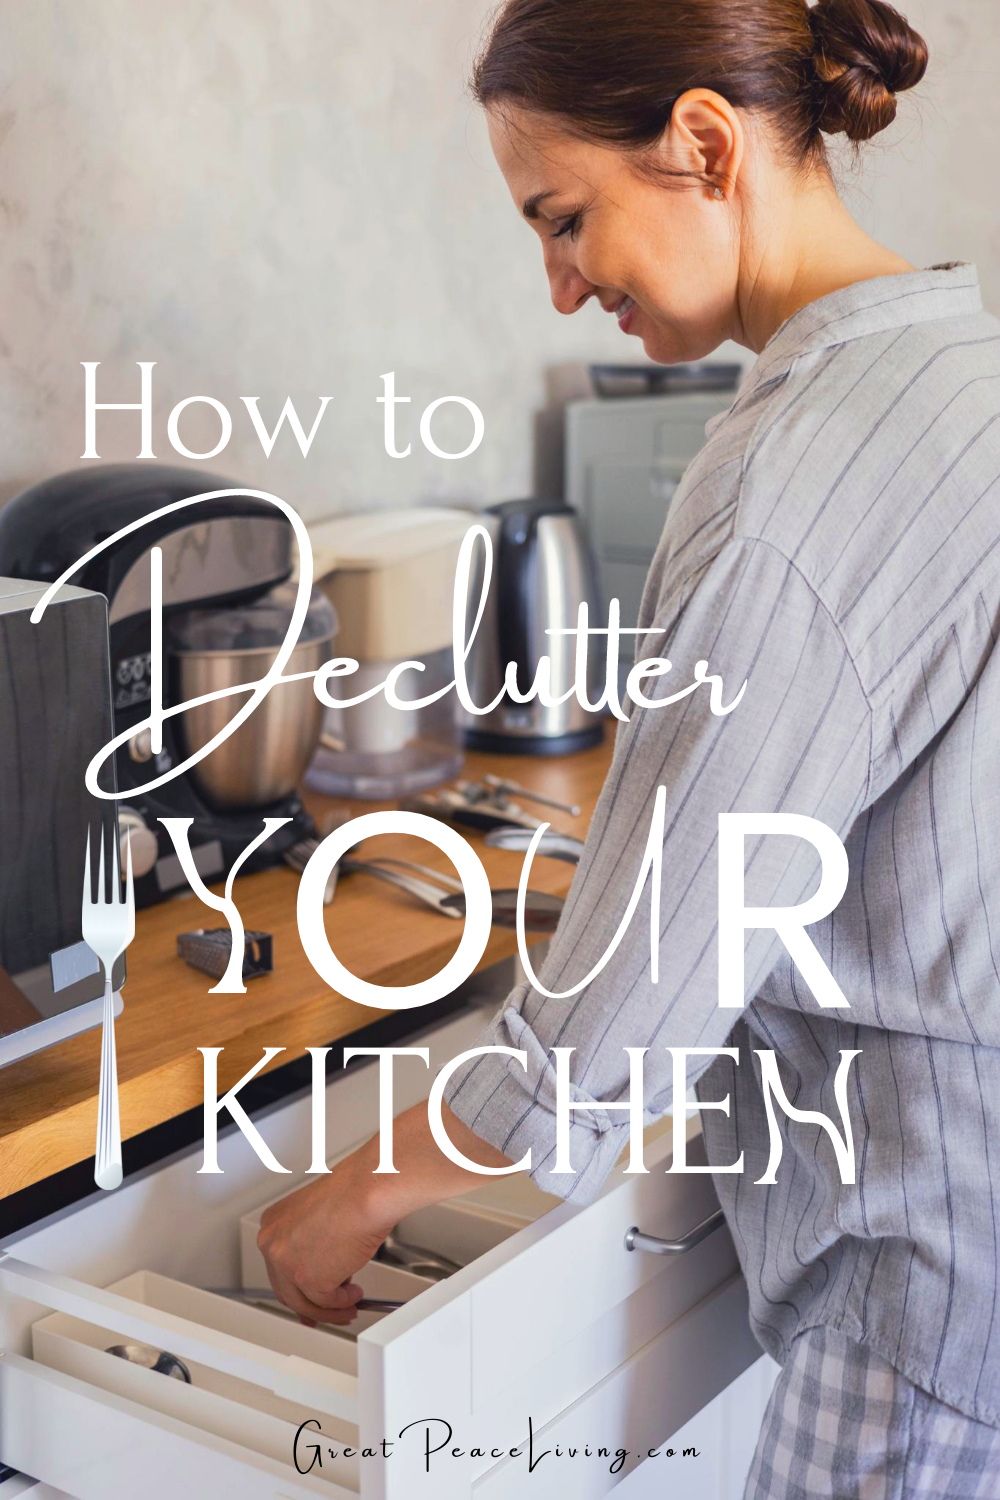 How to Declutter Your Kitchen